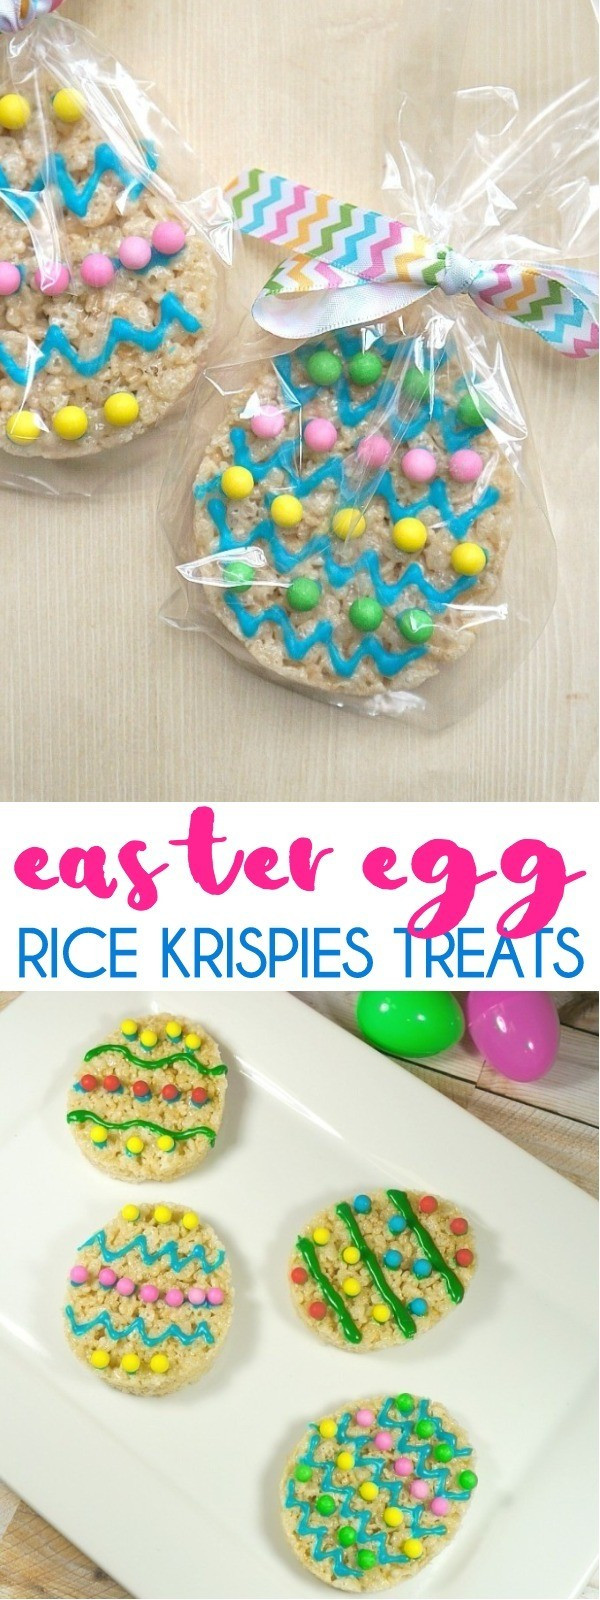 Easter Party Favor Ideas
 Easter Egg Rice Krispies Treats Recipe Fun Easter Party